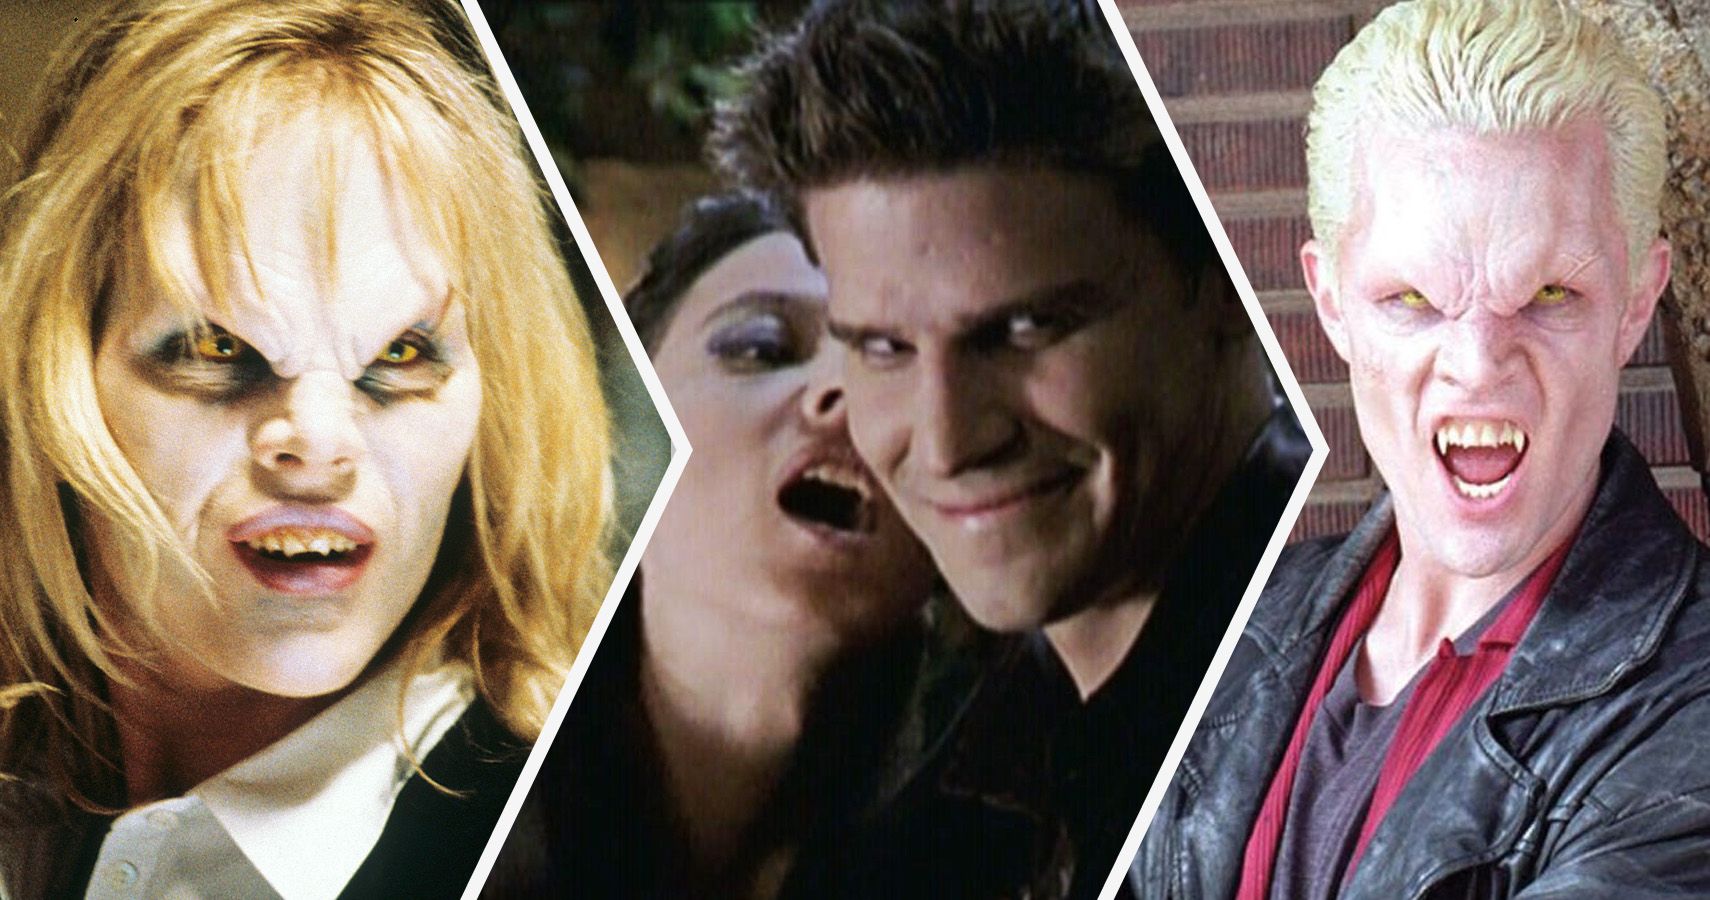 Buffy: 15 Dark Secrets About The Vampires That Fans Had No Idea About